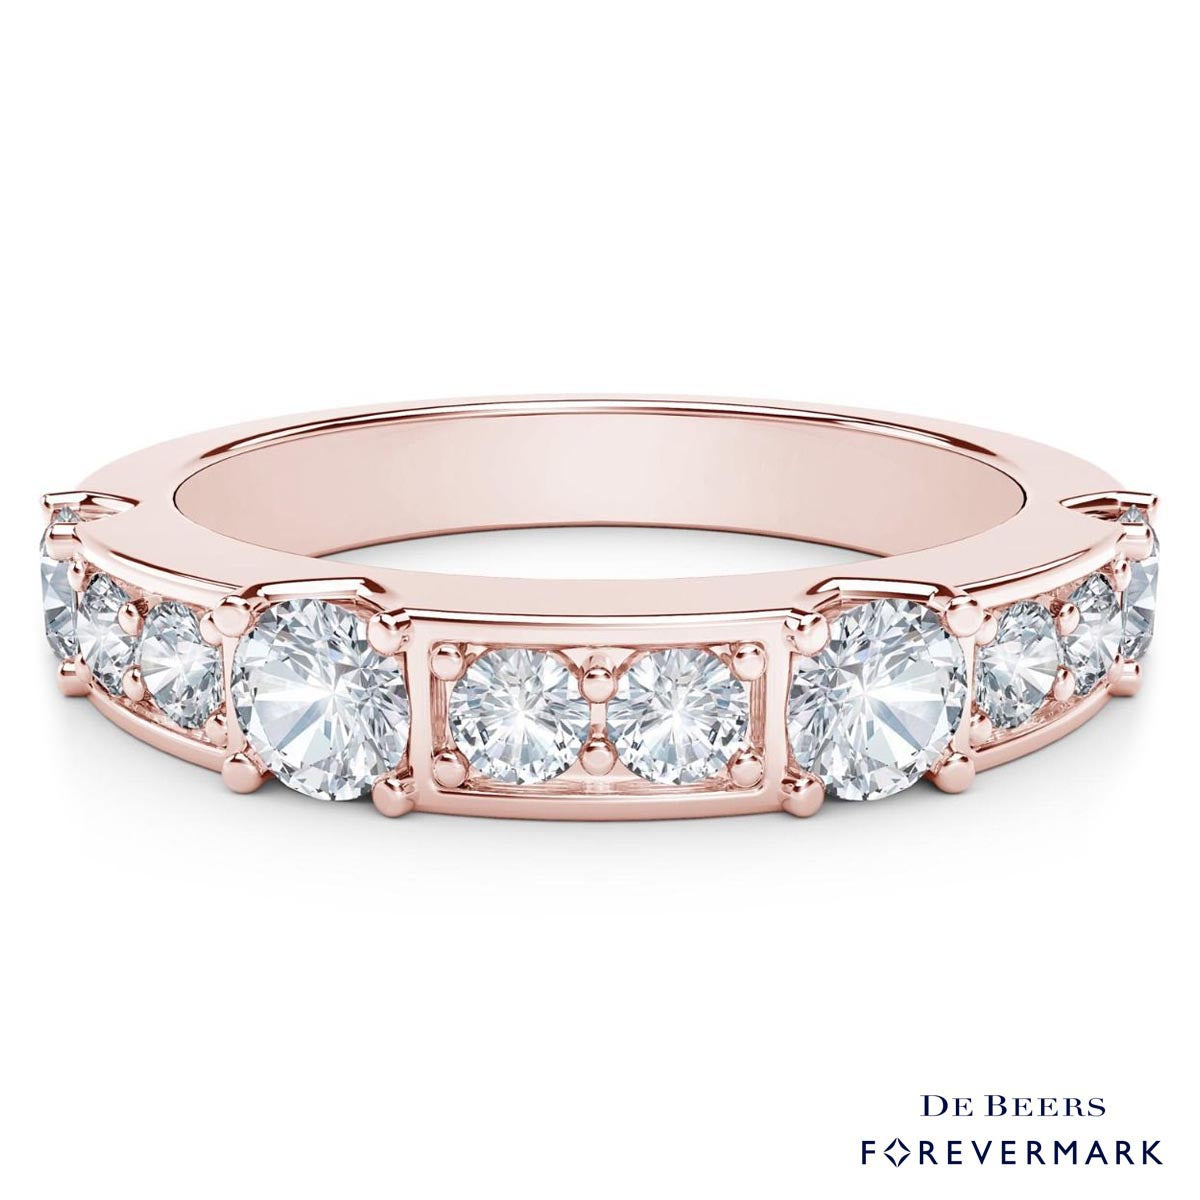 De Beers Forevermark Tribute Collection Diamond Stackable Ring in 18kt Rose Gold (5/8ct tw)